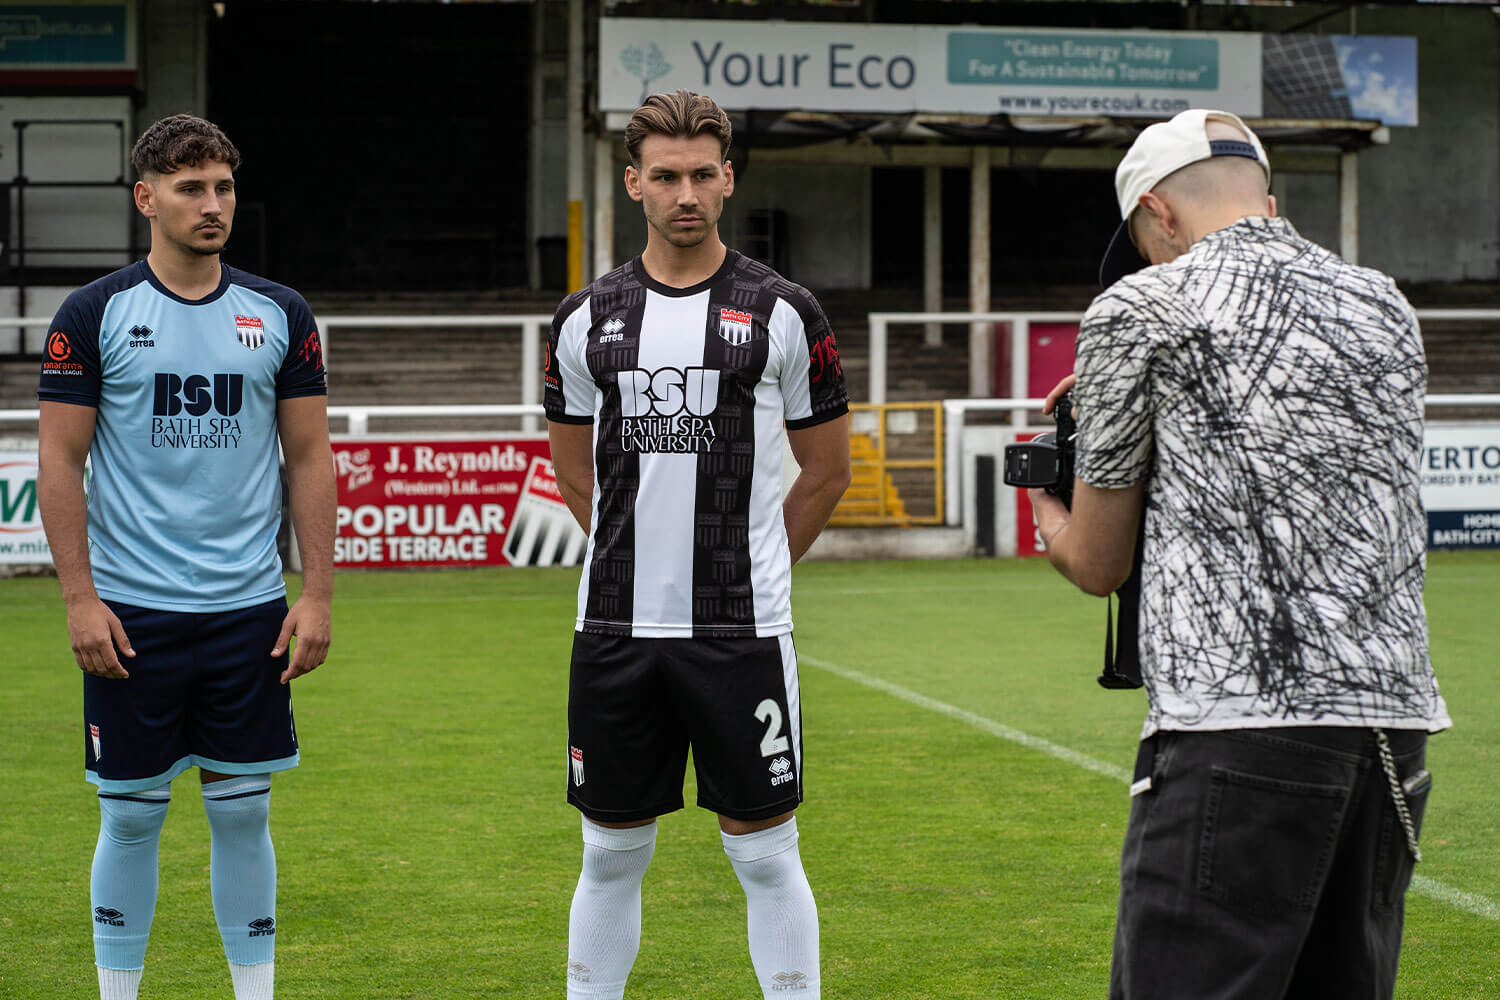 Two football players wearing Bath City shirts, one black and white, one blue, being photographed by a student at Twerton Park football stadium